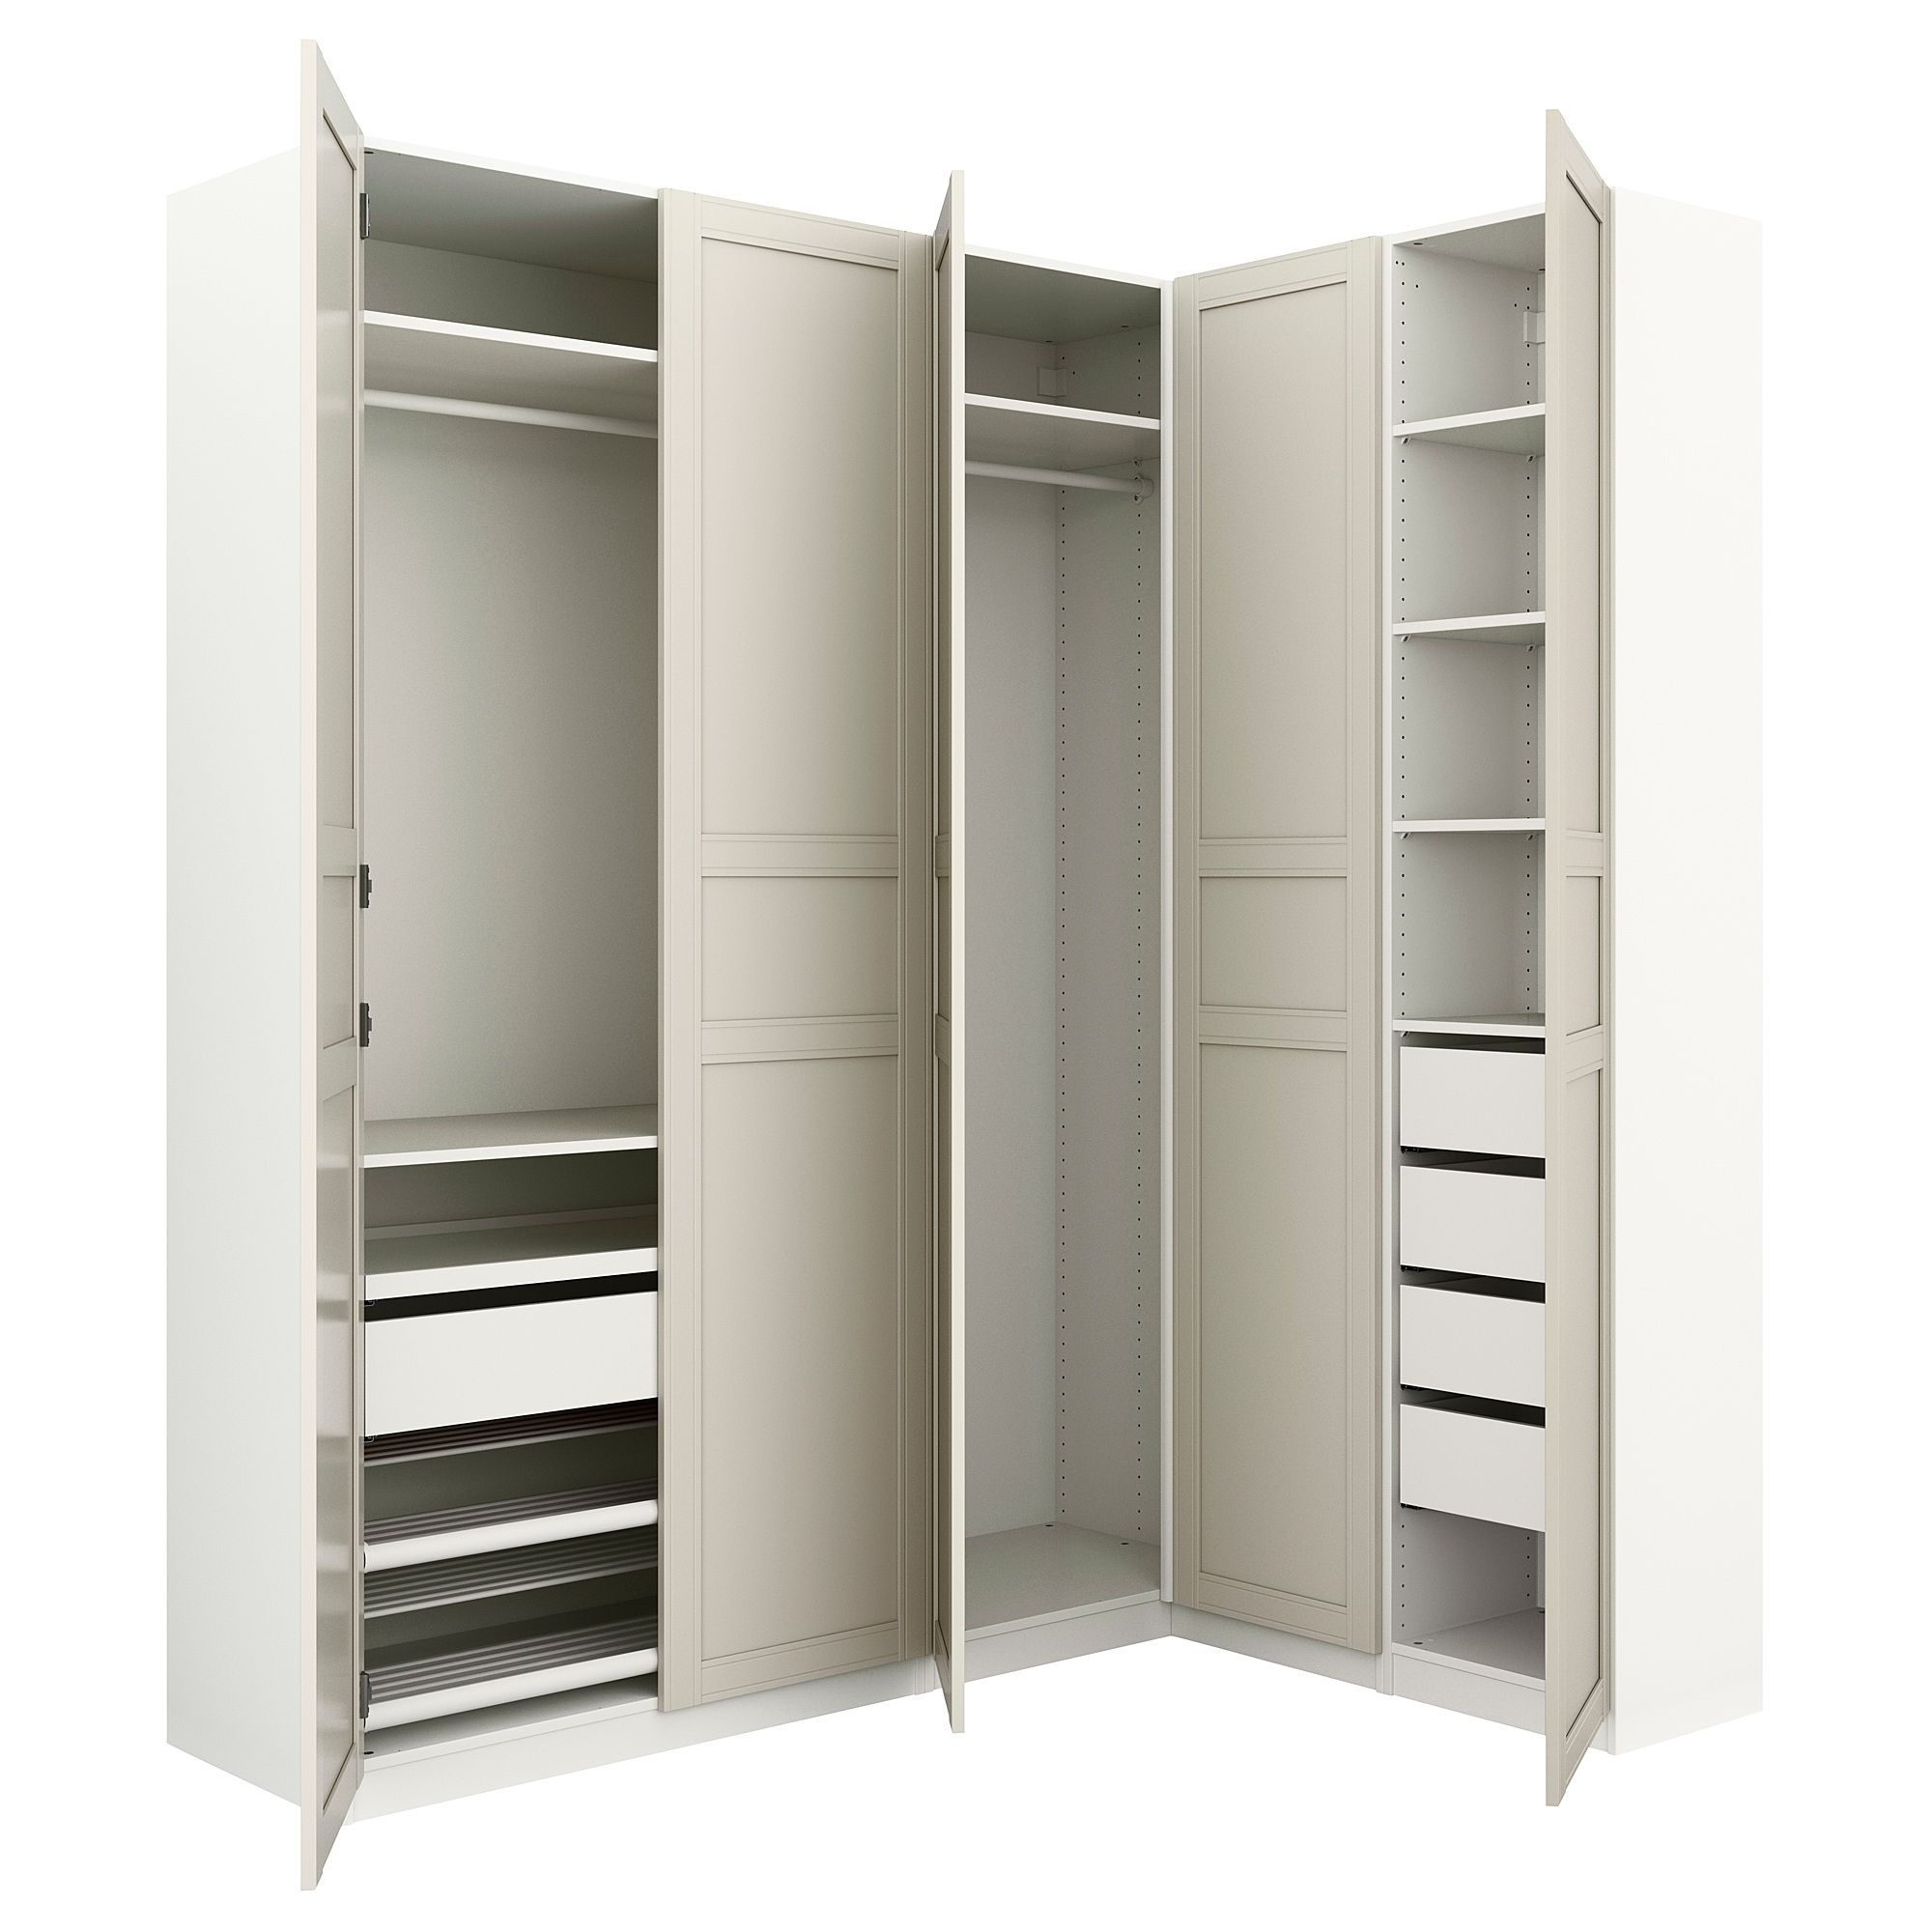 The 15 Best Collection of Corner Wardrobes Closet Ikea